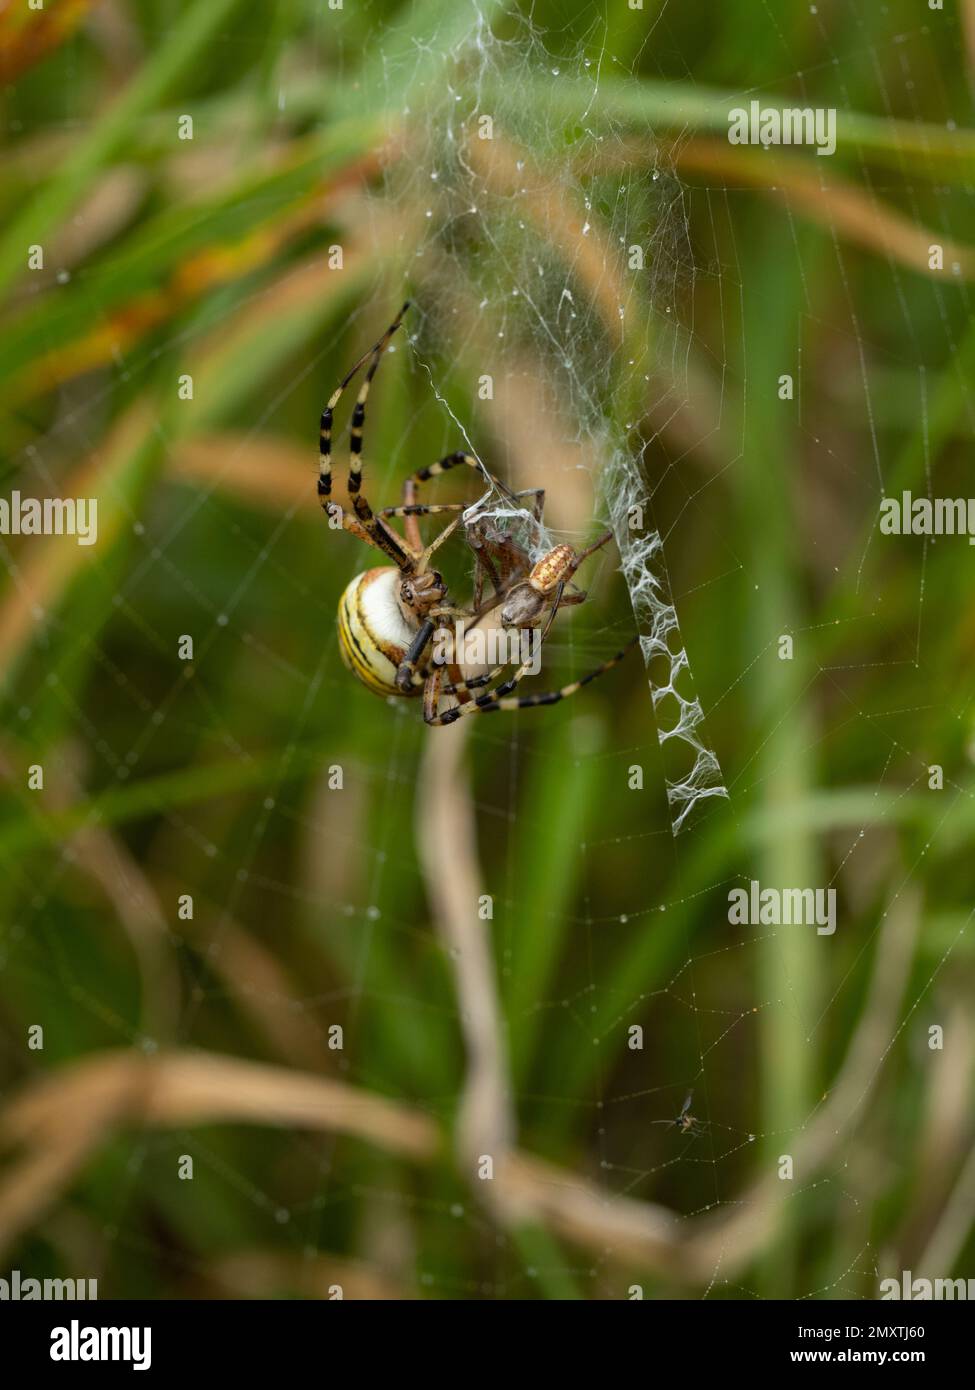 A female wasp spider that has just killed a male wasp spider after mating. Stock Photo